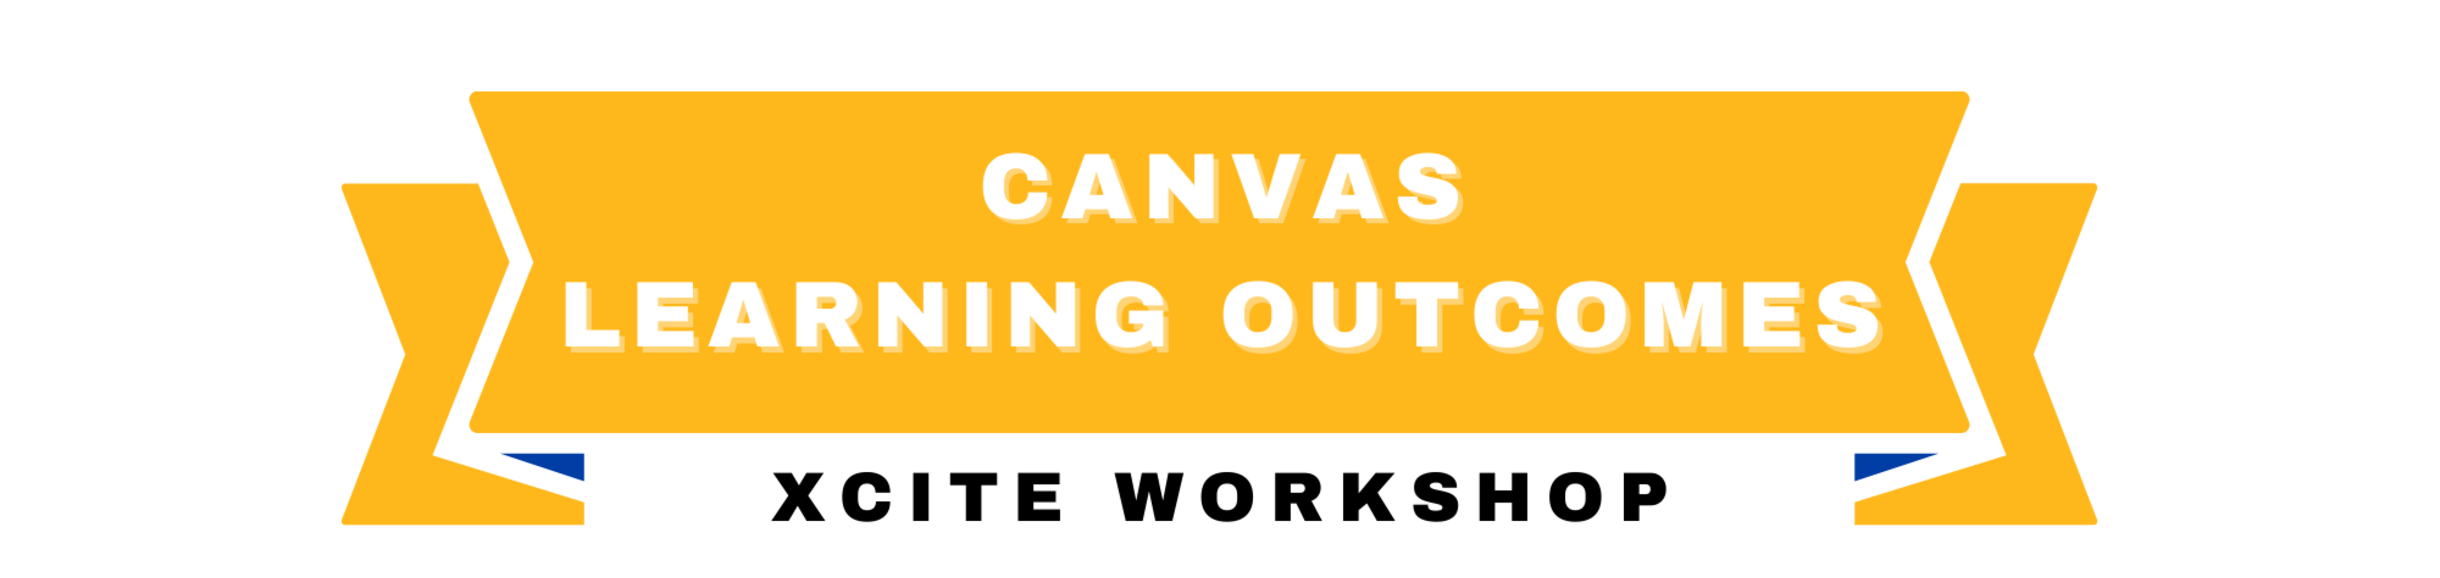 canvas learning outcomes xcite workshop